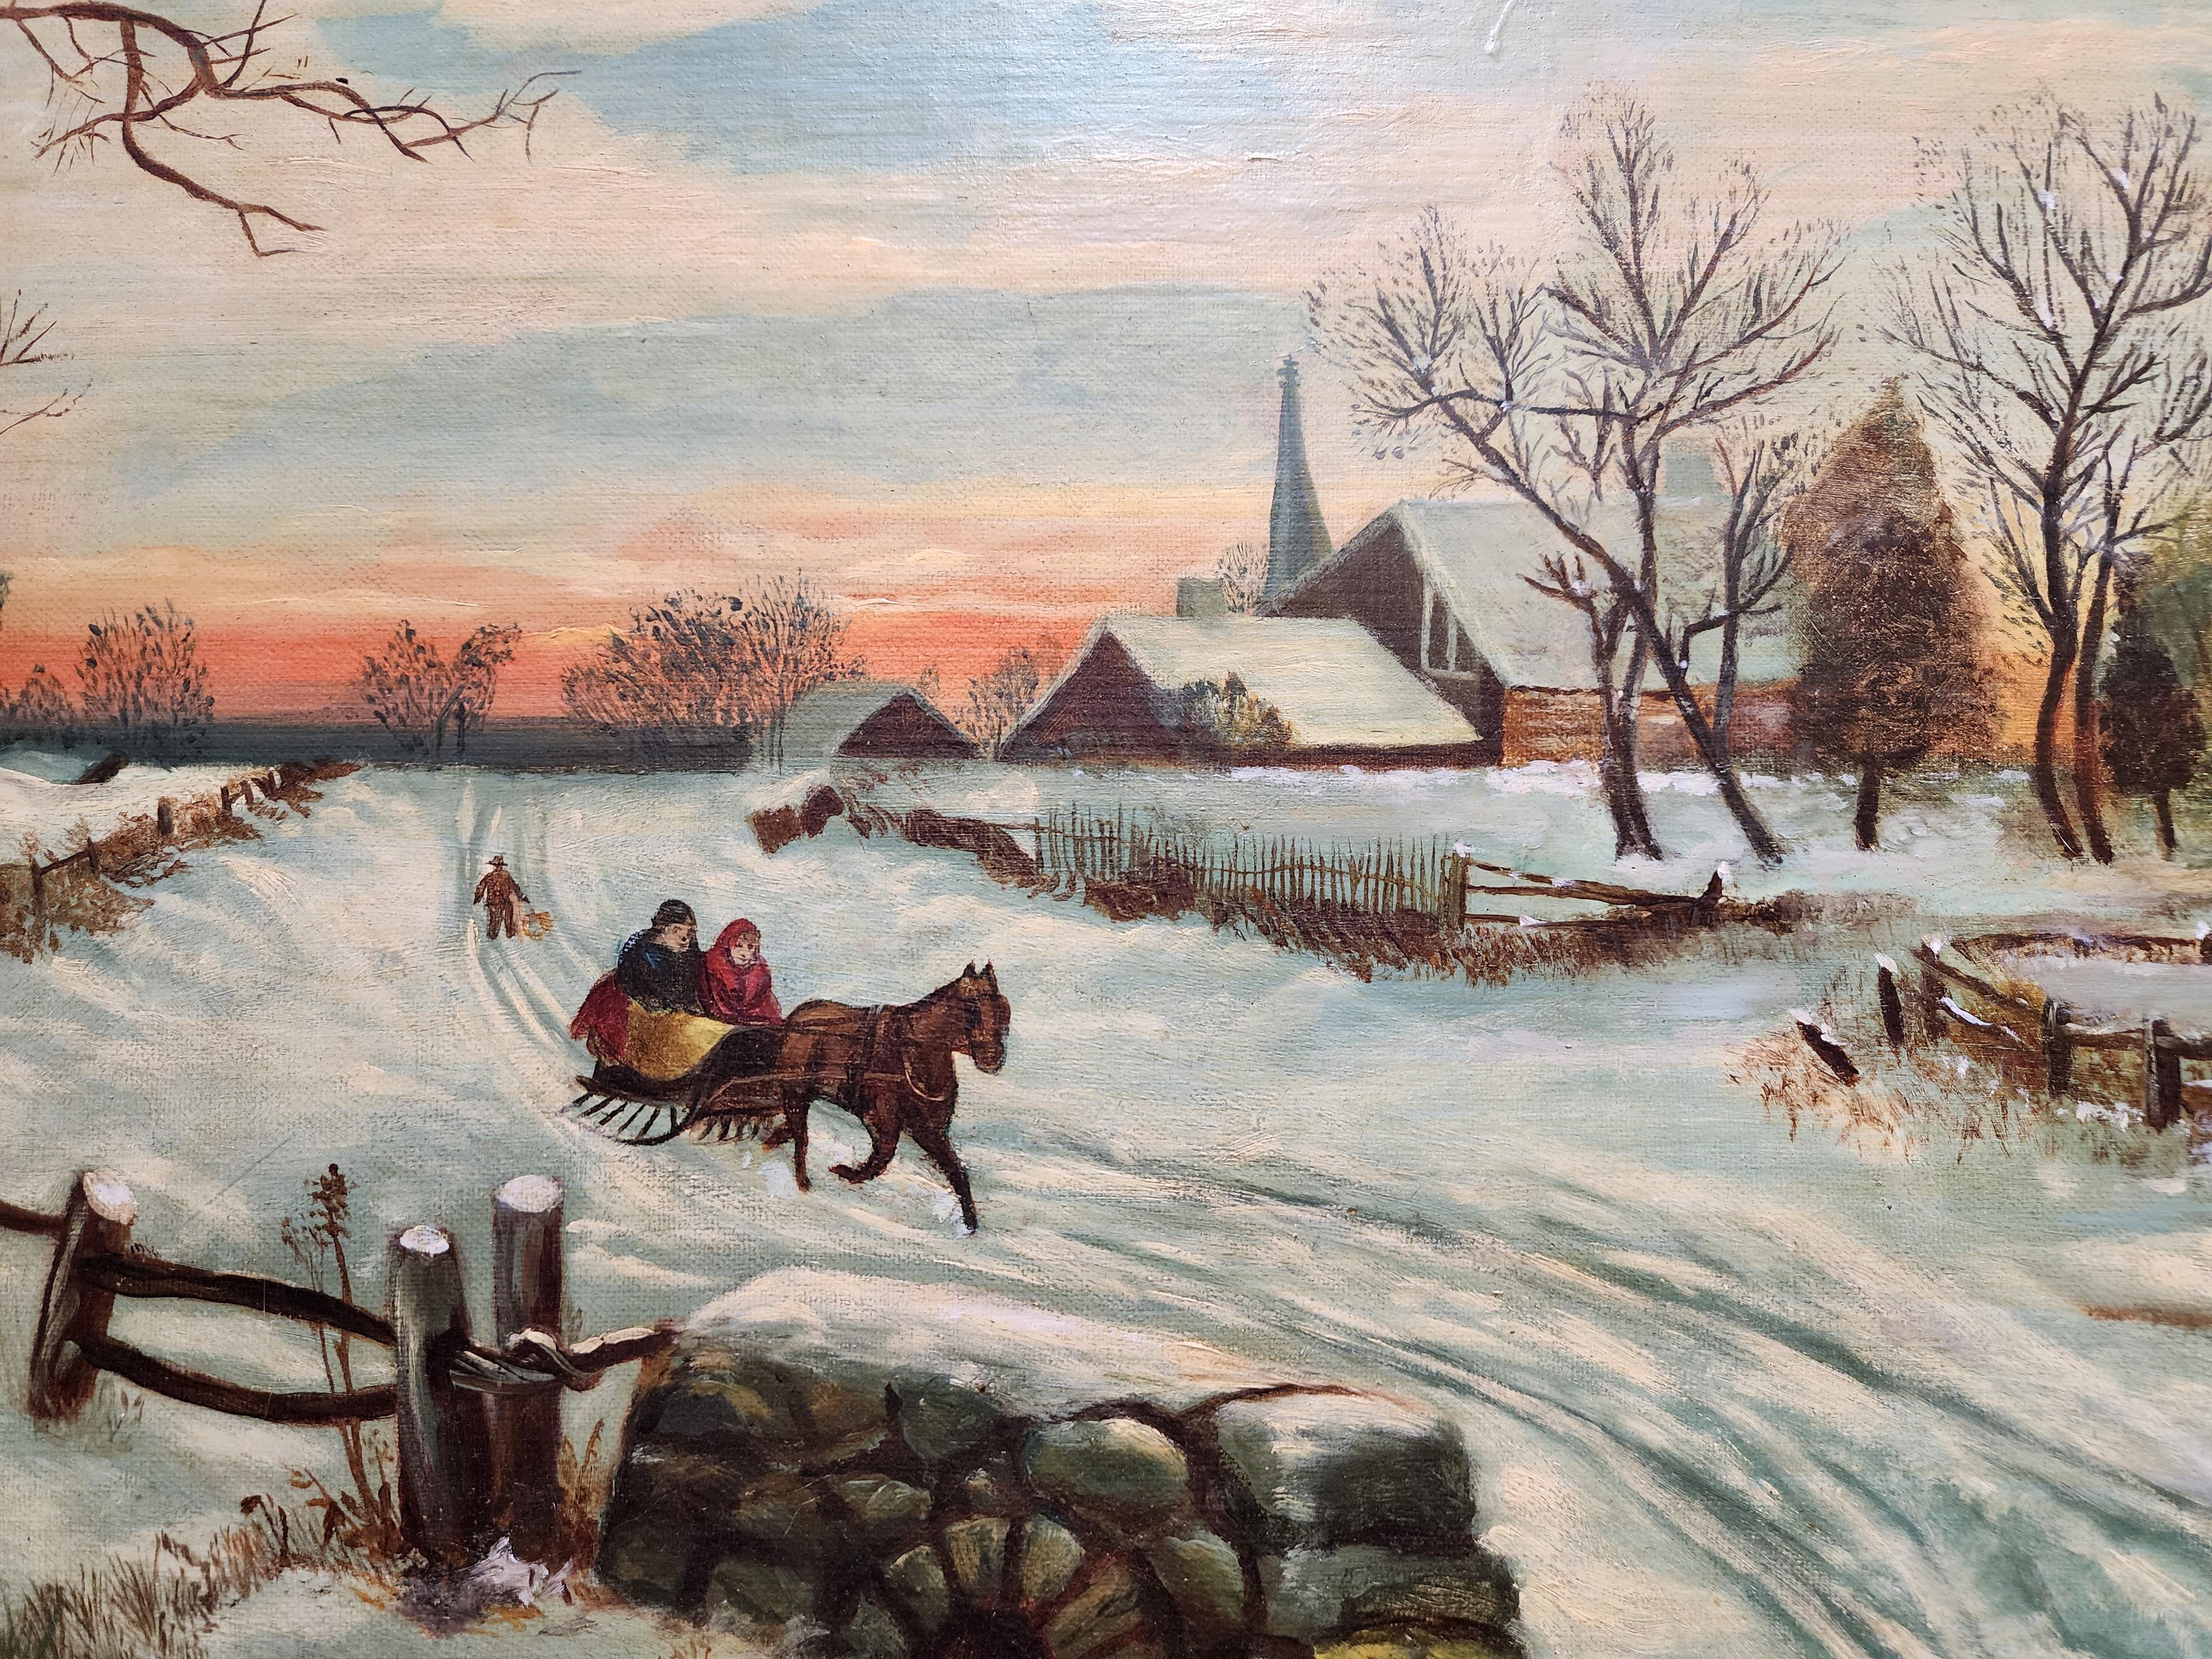 Along a Winter Path, American Folk Art Snow Scene, Horse Drawn Cart, Sun Rise - Brown Landscape Painting by Unknown